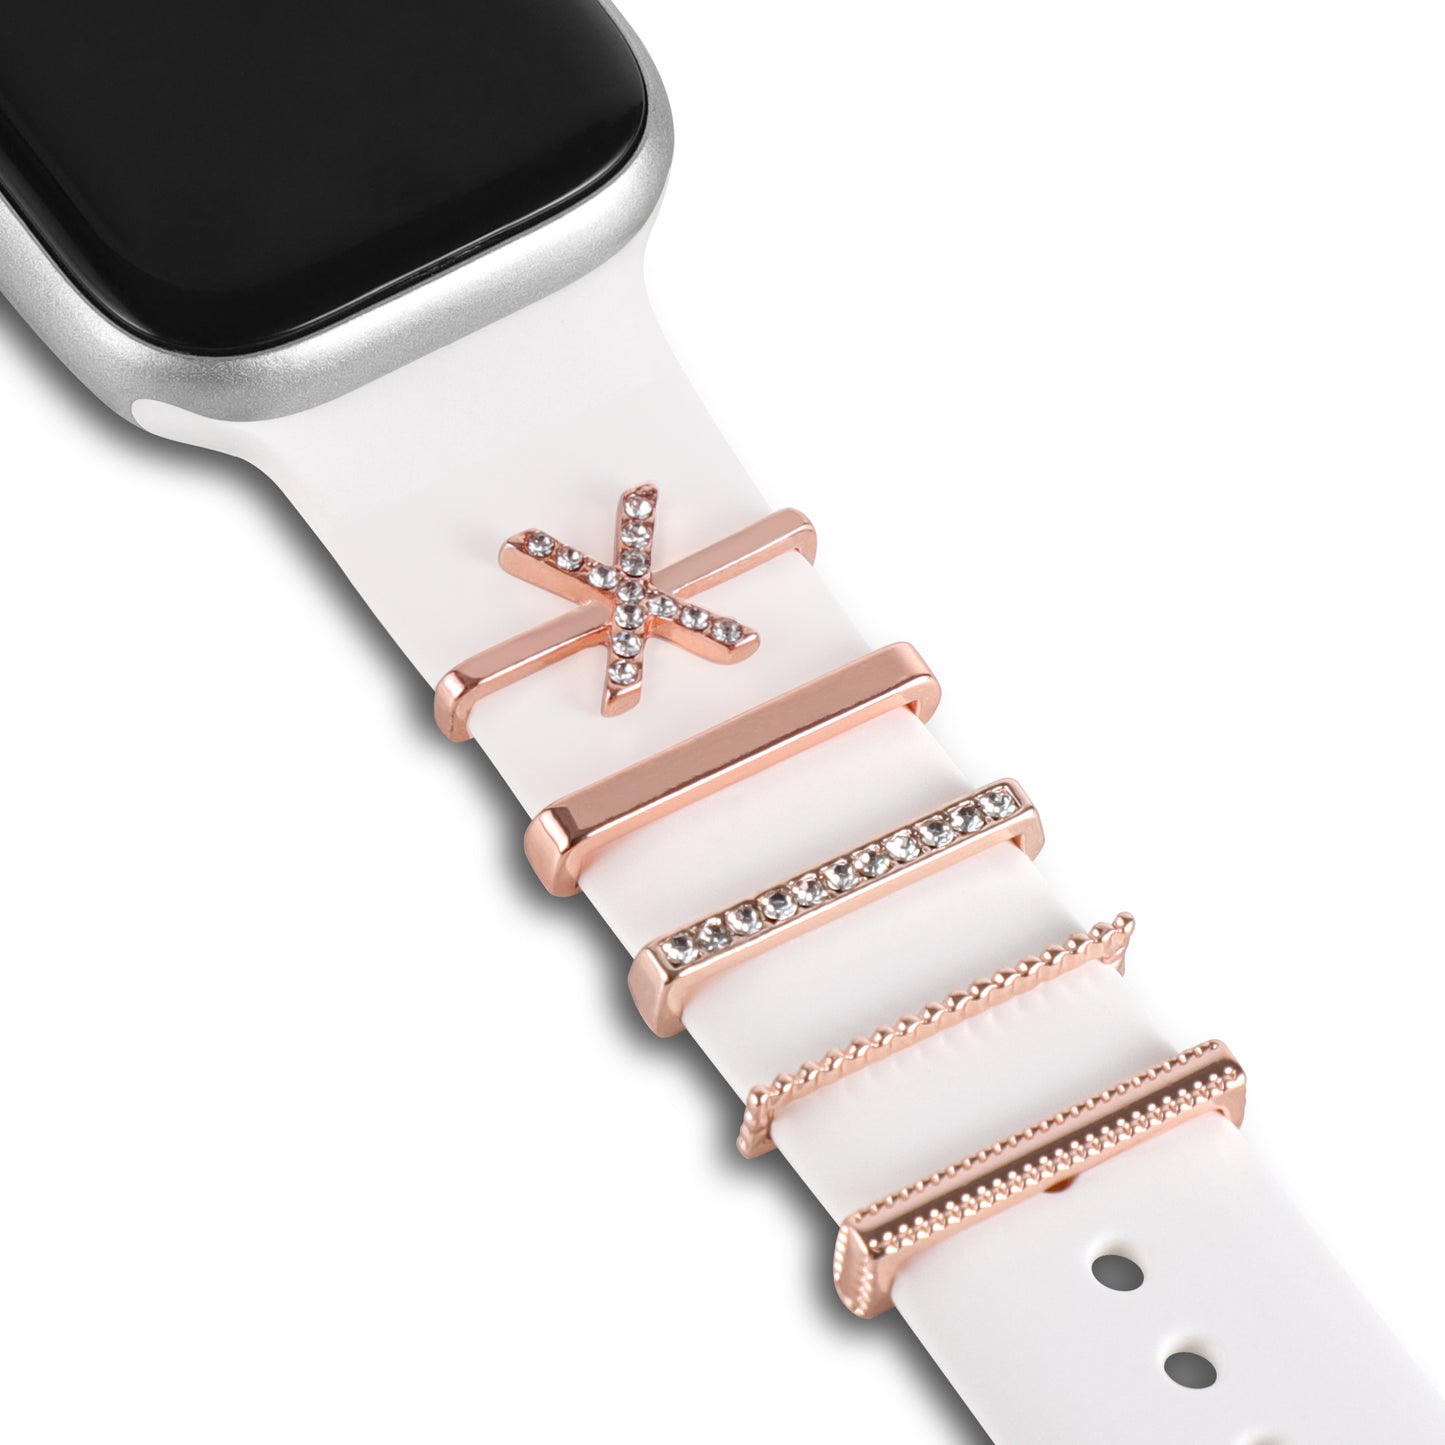 arktisband Apple Watch Charms "X Style"